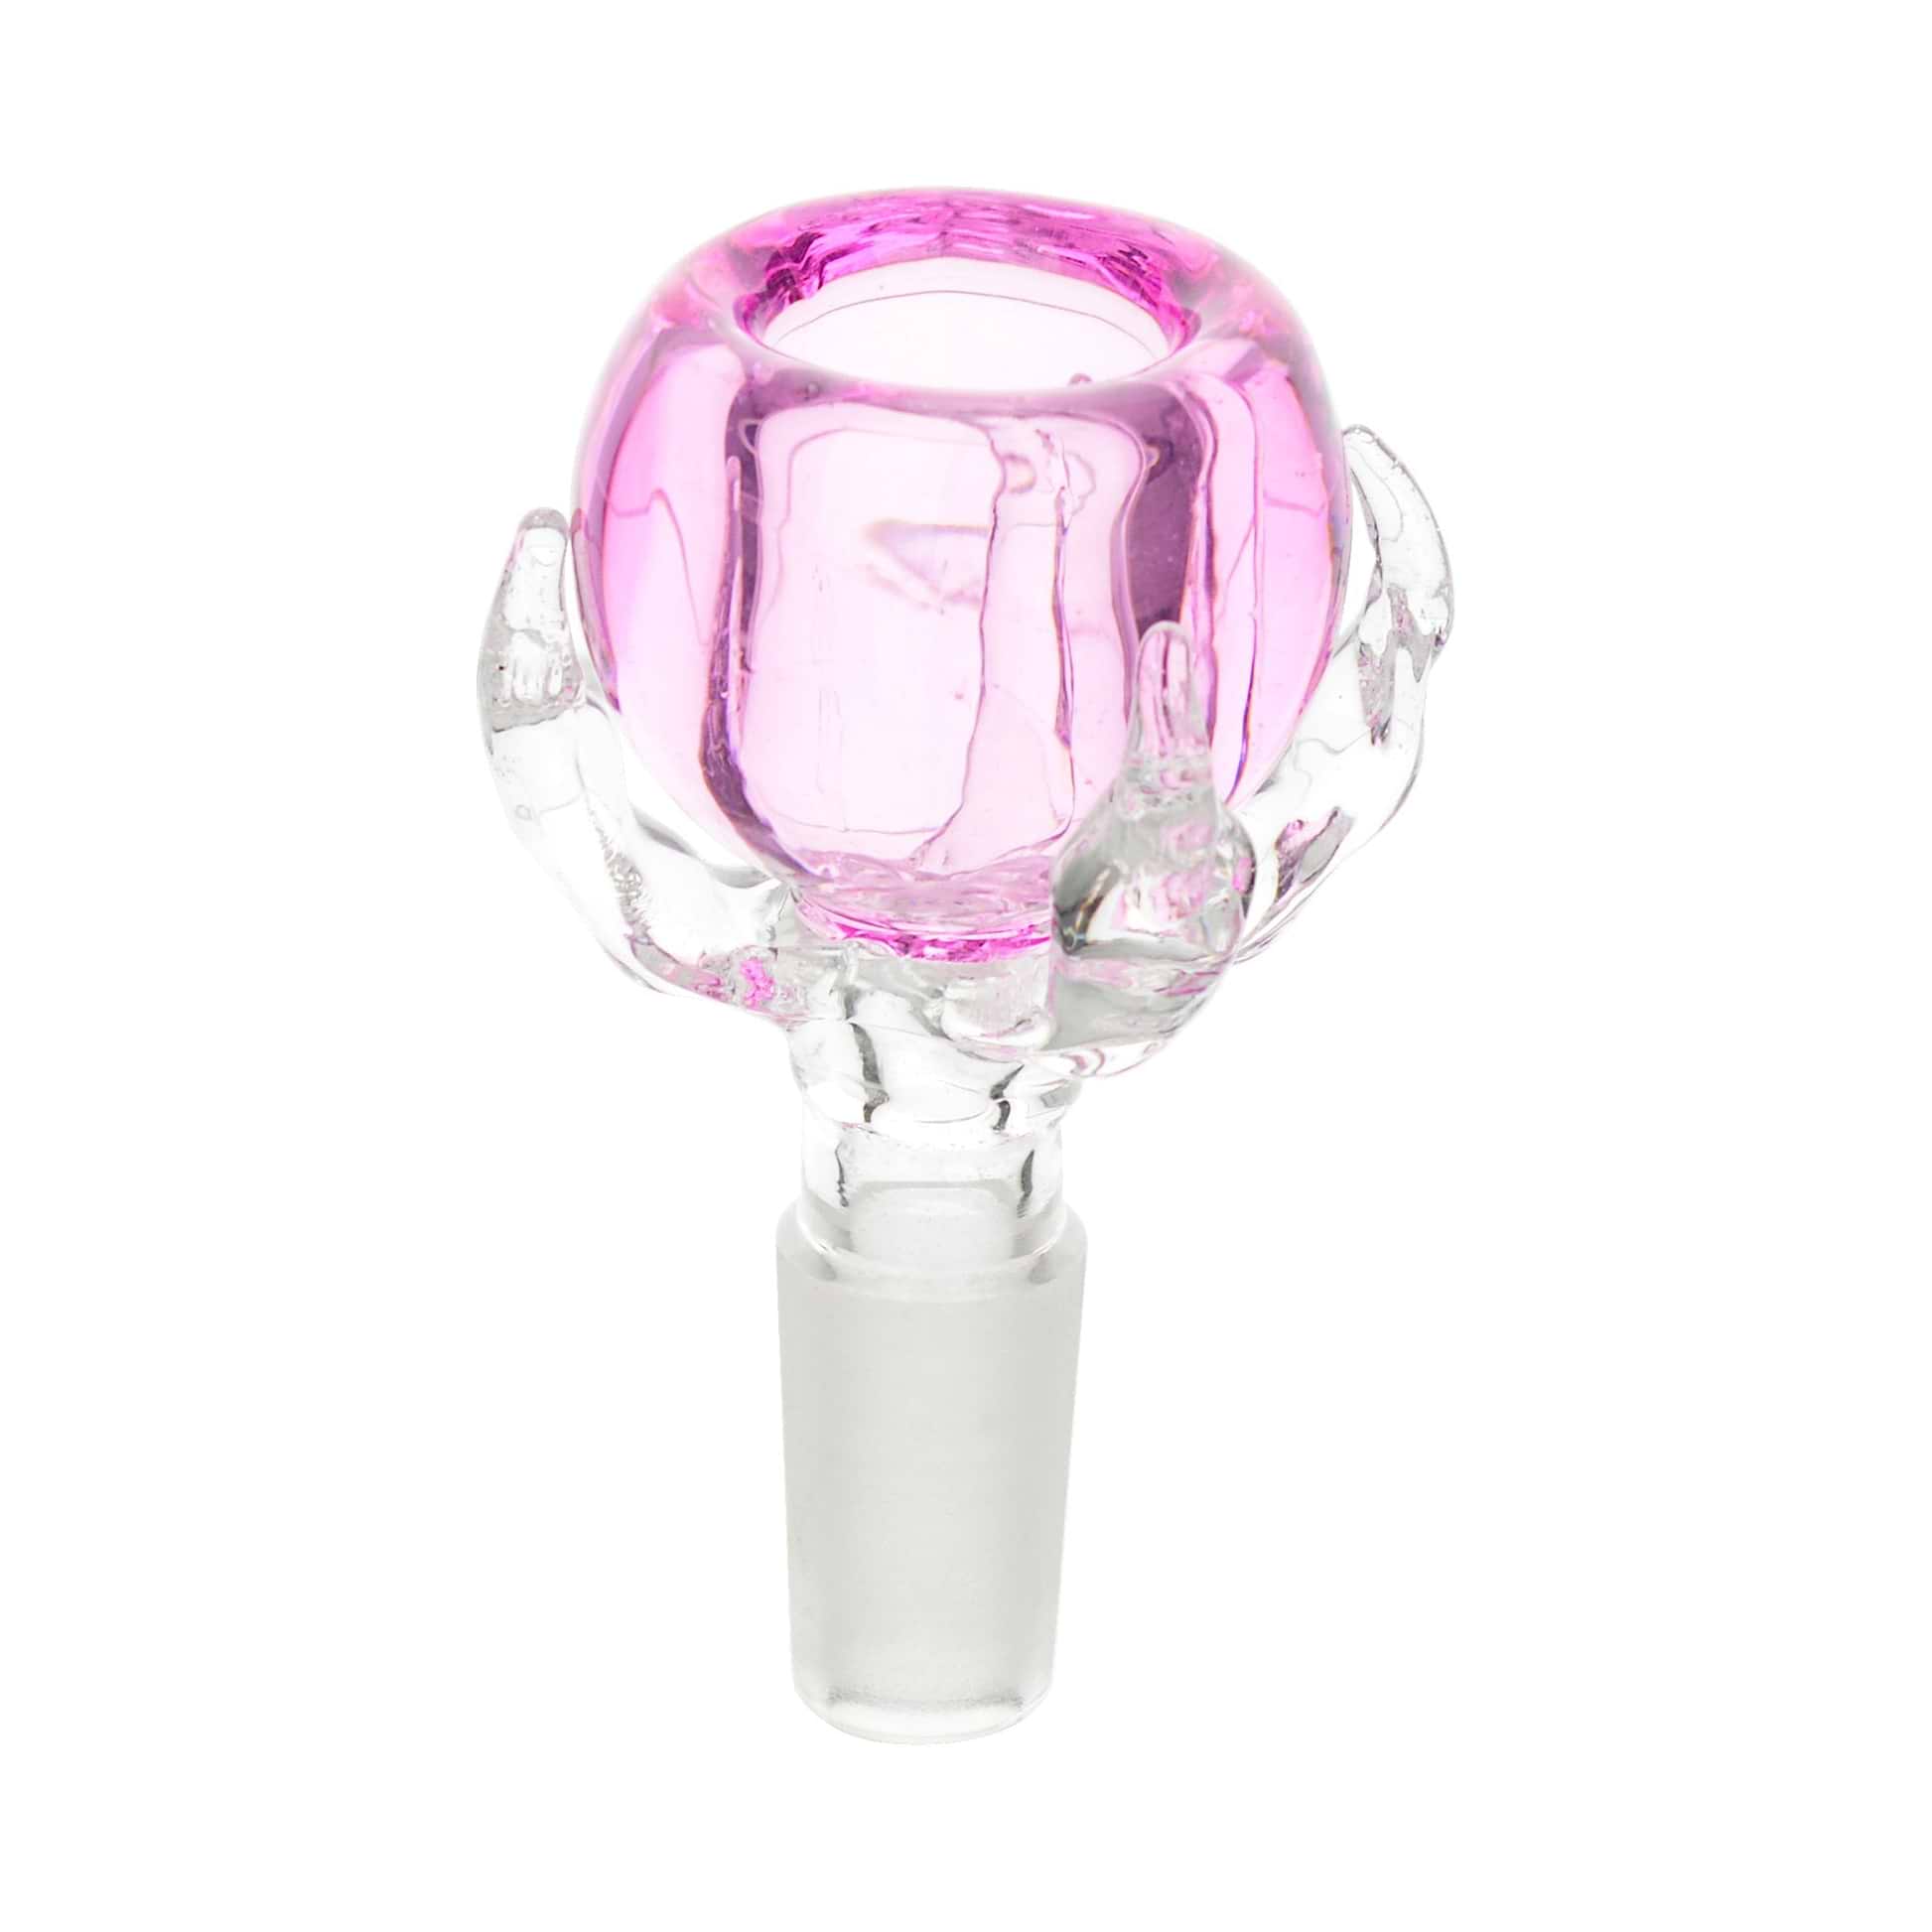 Chic 14mm rosy crystal glass bowl for bong smoking accessory with pink crystal clear claws as if holding a glass of of wine